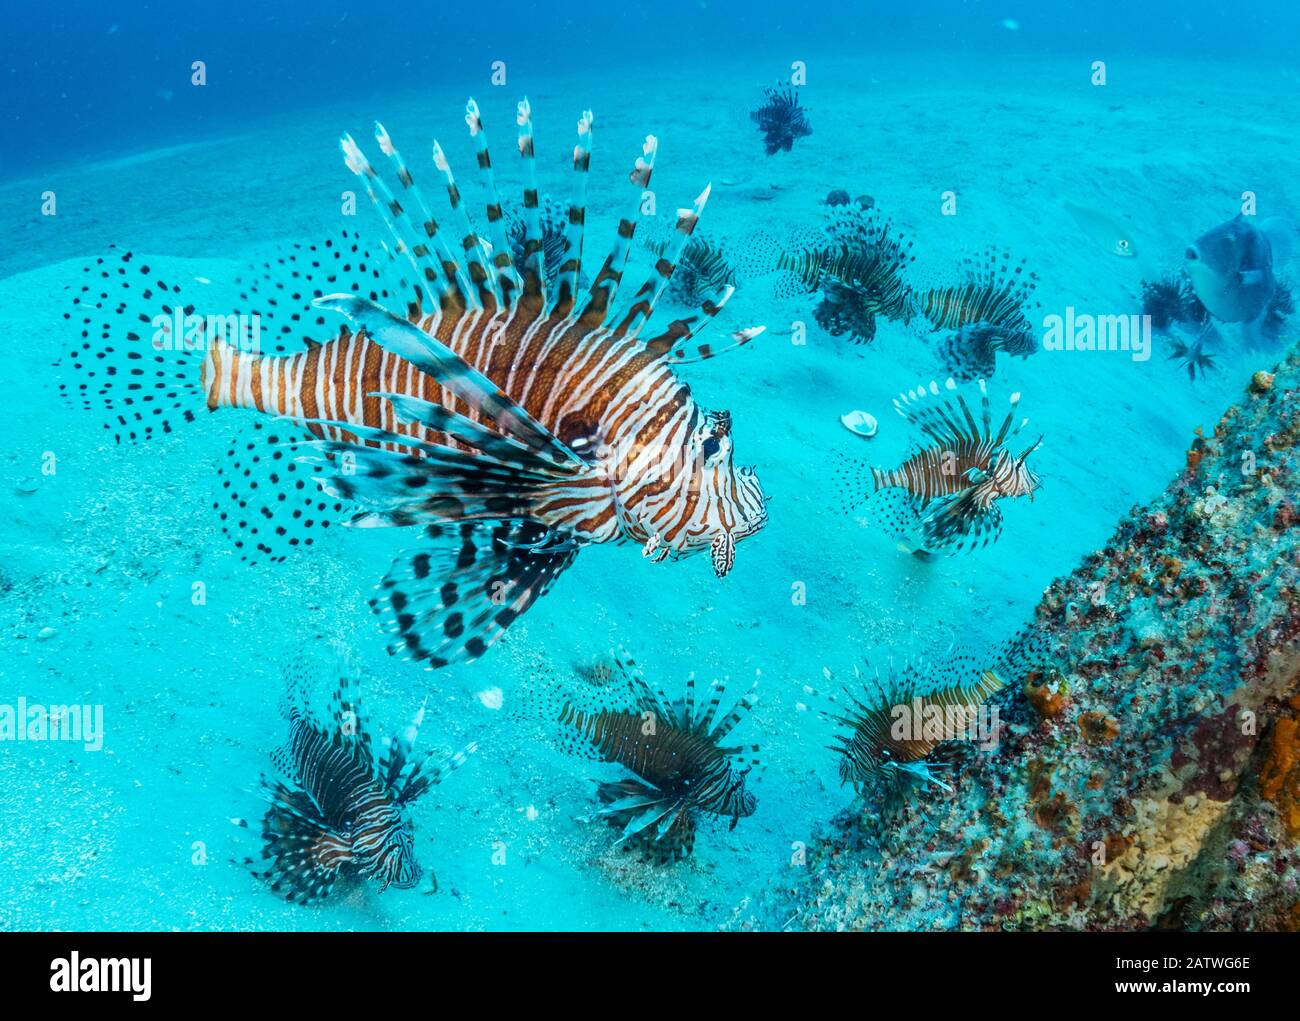 Invasive Lionfish (Pterois volitans) which have taken over and are wiping out native fish in the Atlantic ocean. The highest densities are in the northern gulf of Mexico. Destin, Florida, USA. Stock Photo